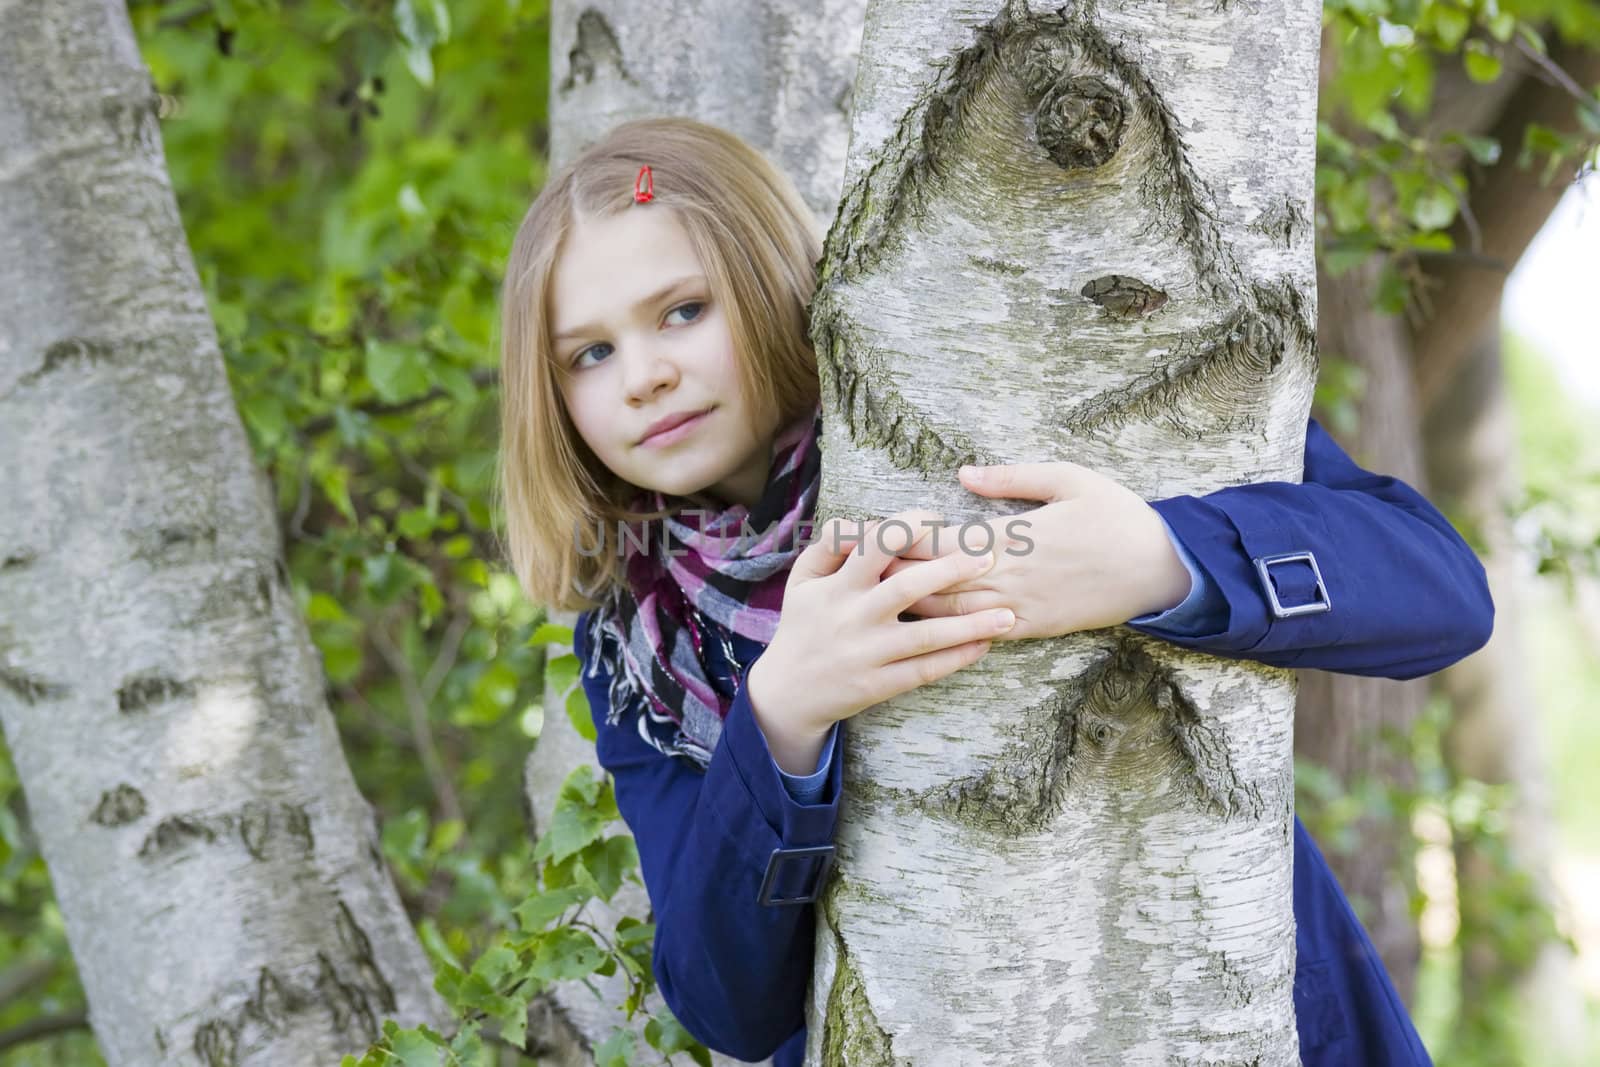 Girl hugging tree trunk and smiling  by miradrozdowski